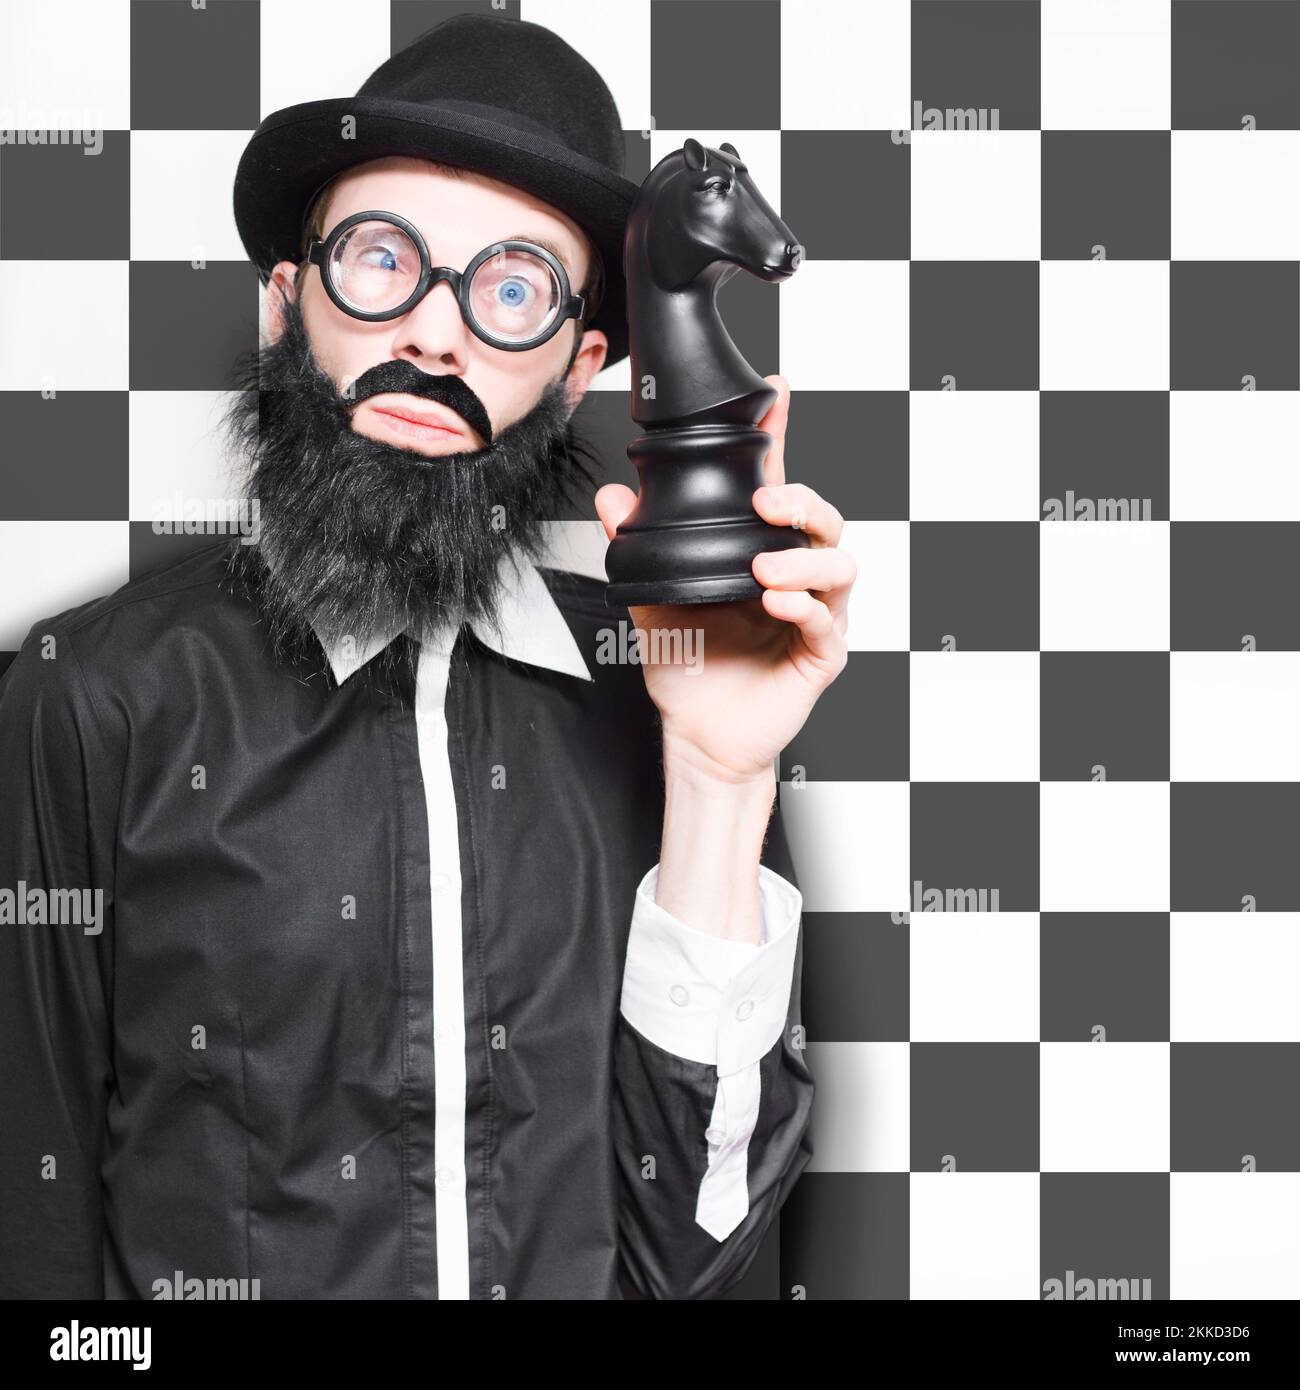 Smart Male Business Analyst Thinking And Devising A Market Strategy Plan While Moving A Giant Chess Game Piece, On Black And White Background Stock Photo